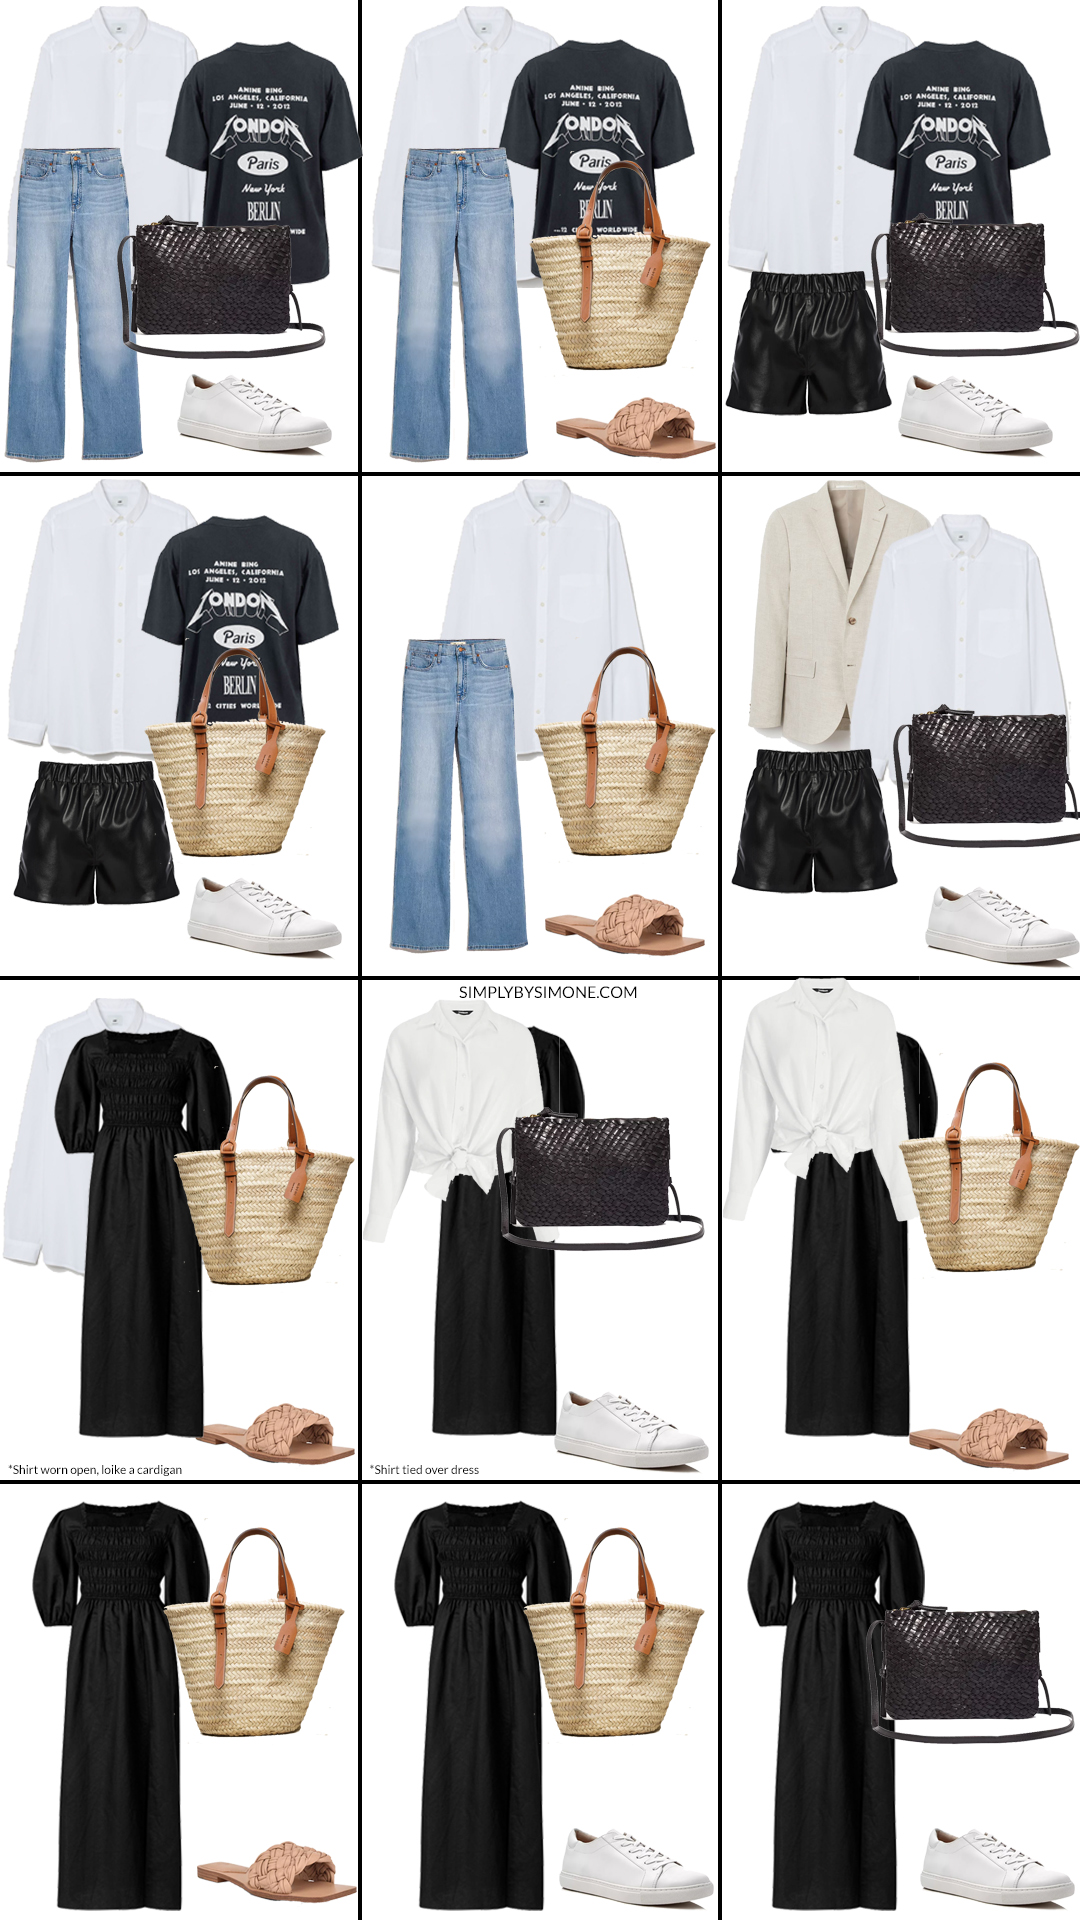 Summer Capsule Wardrobe - 11 Items 36 Outfit Ideas for Summer - Looks 25-36